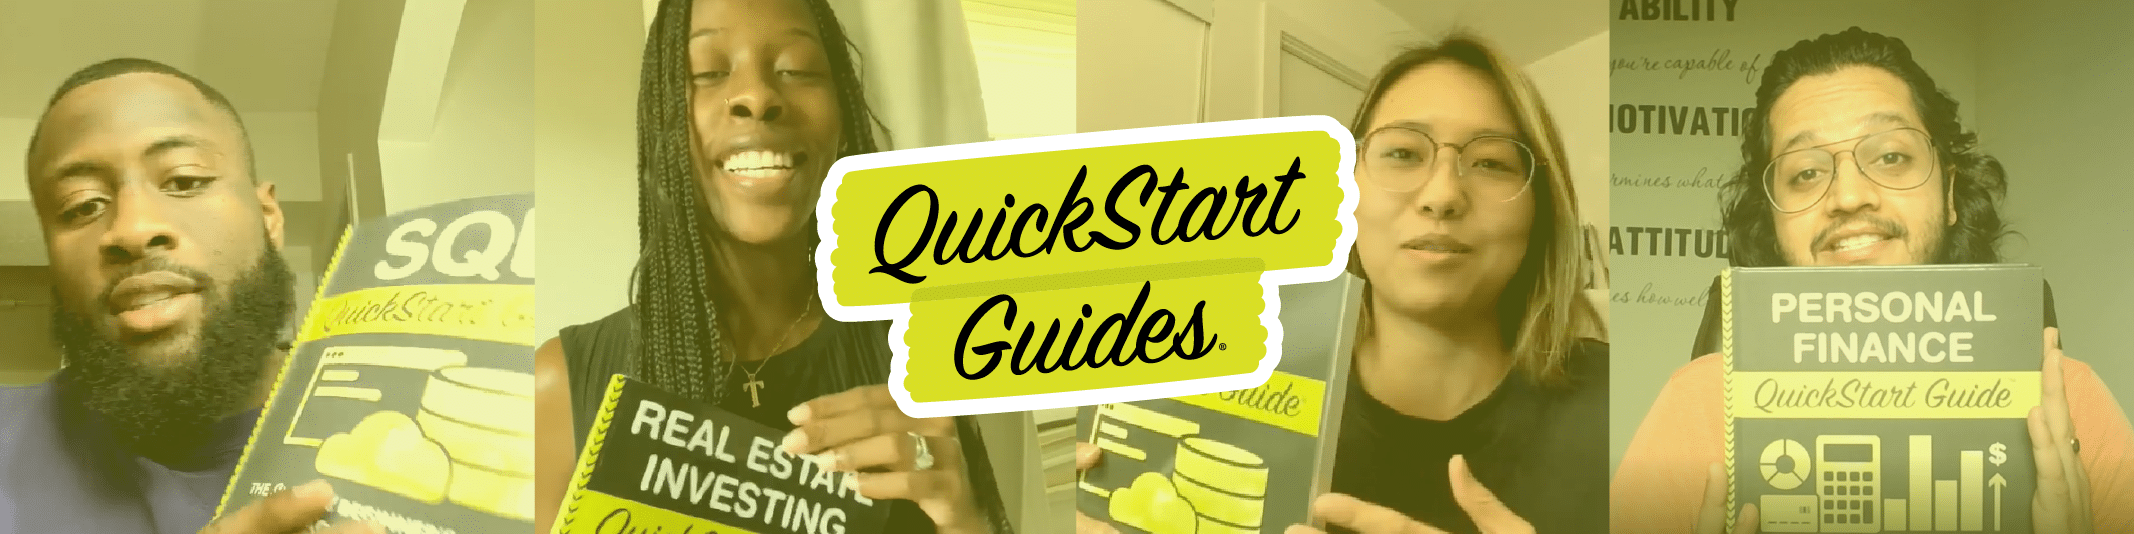 Share your experience with your new QuickStart Guides and receive a free book - it's a win-win!